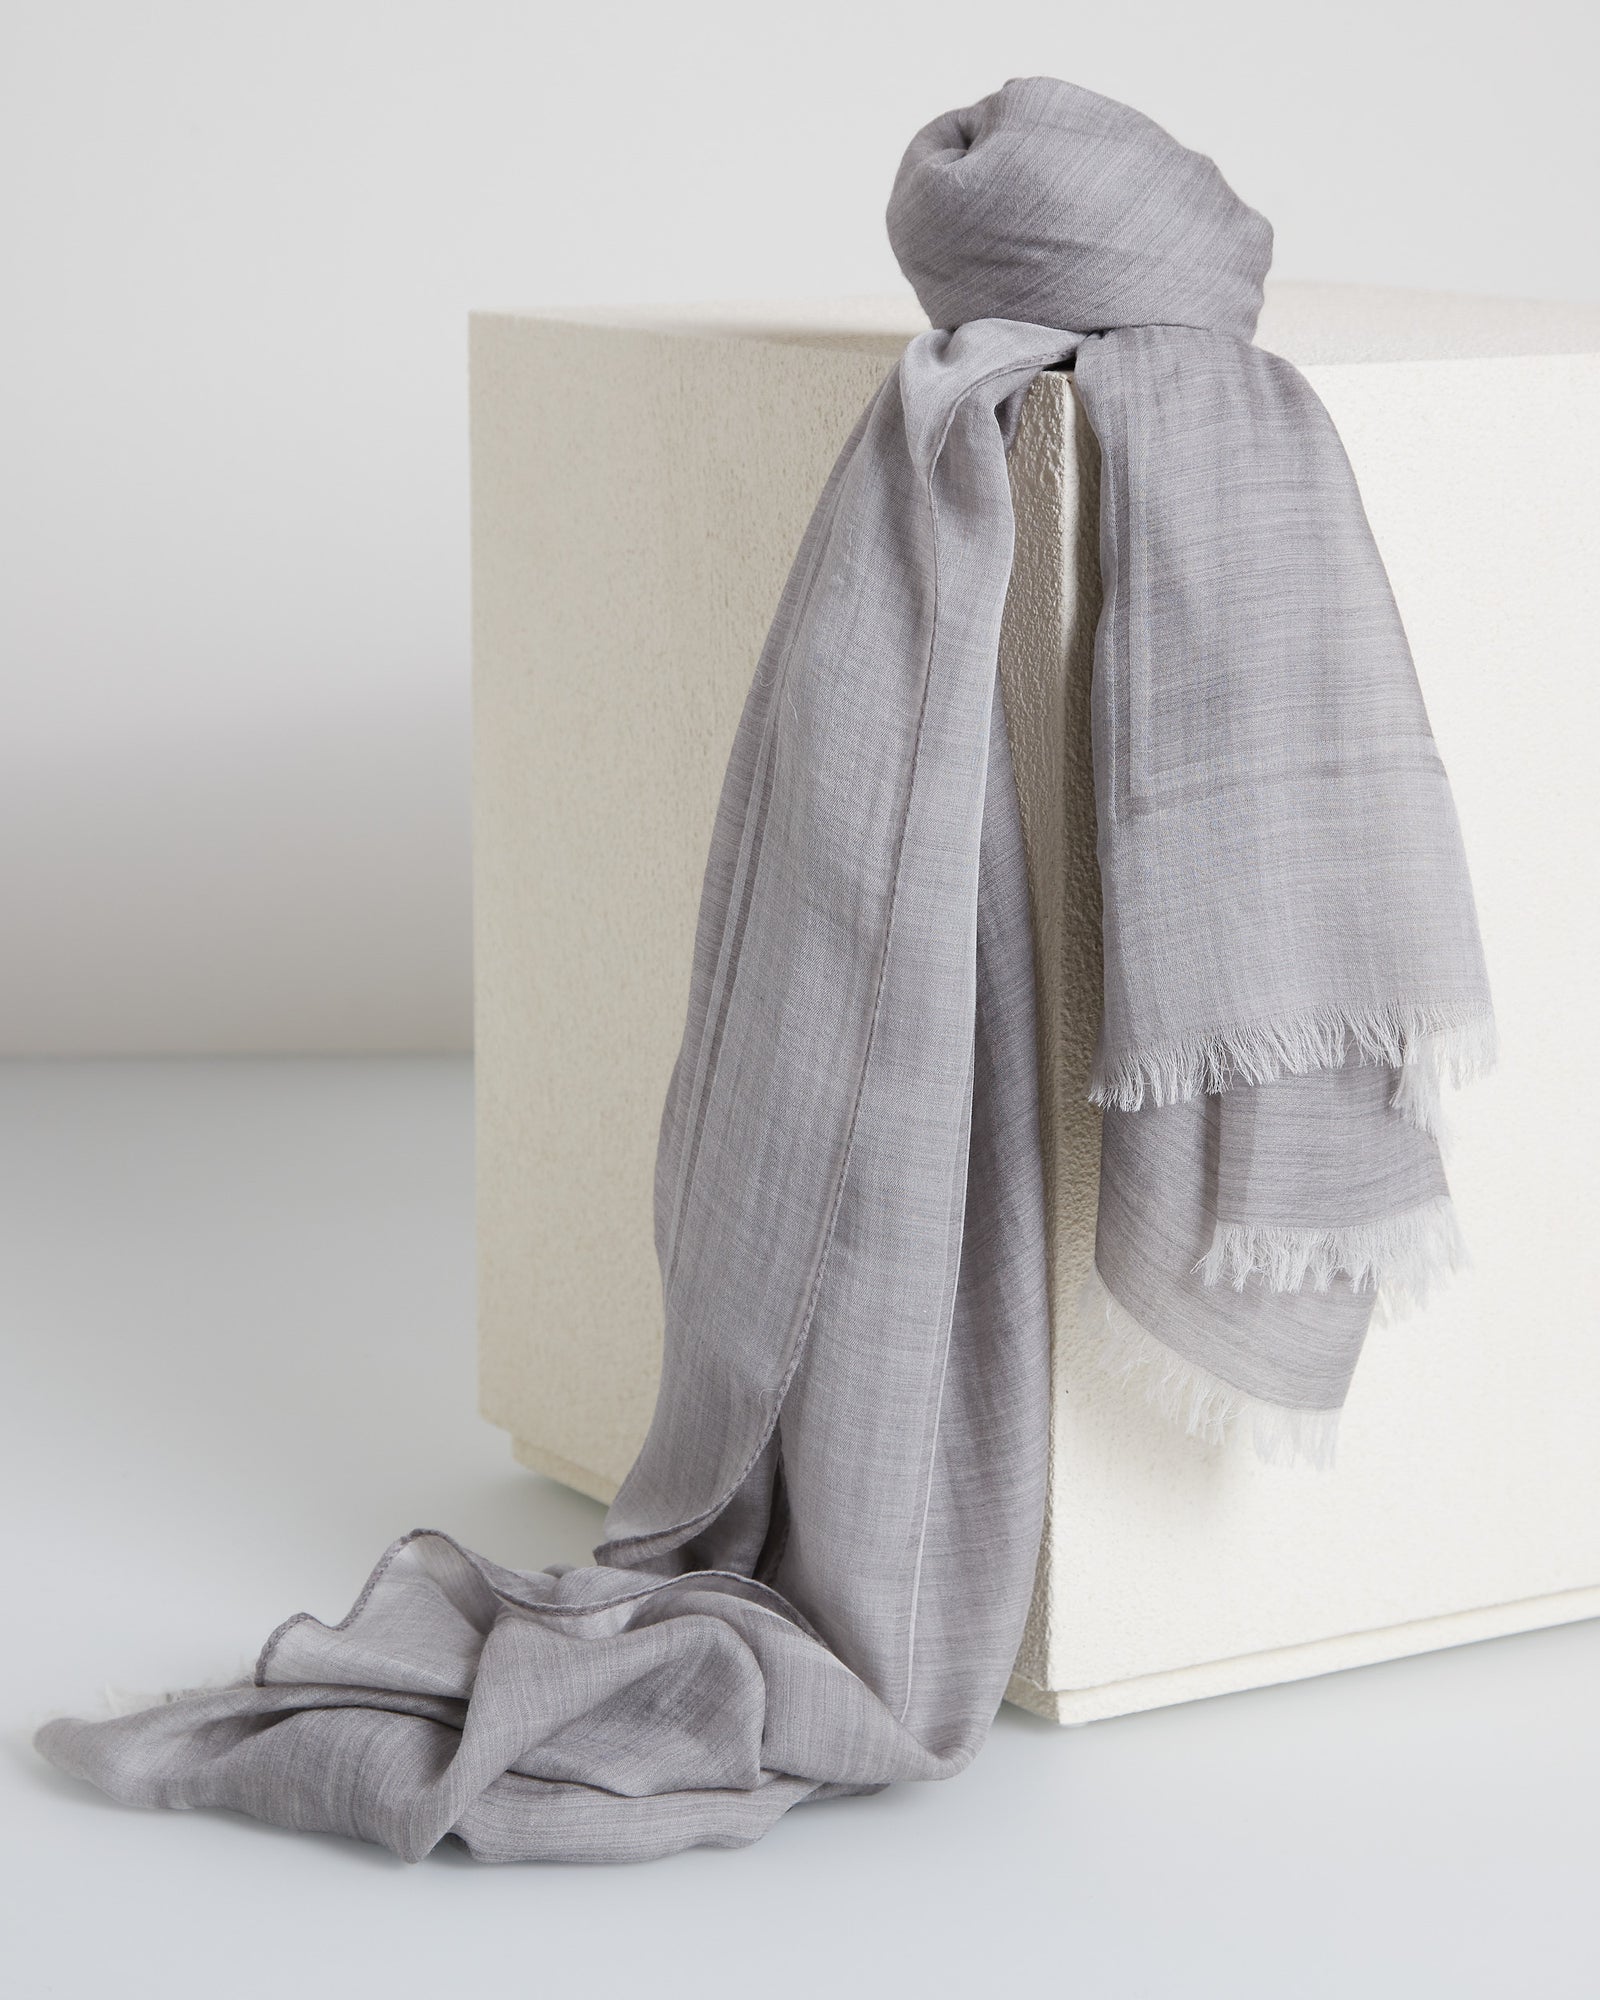 Wrapping stole with Colombo logo.